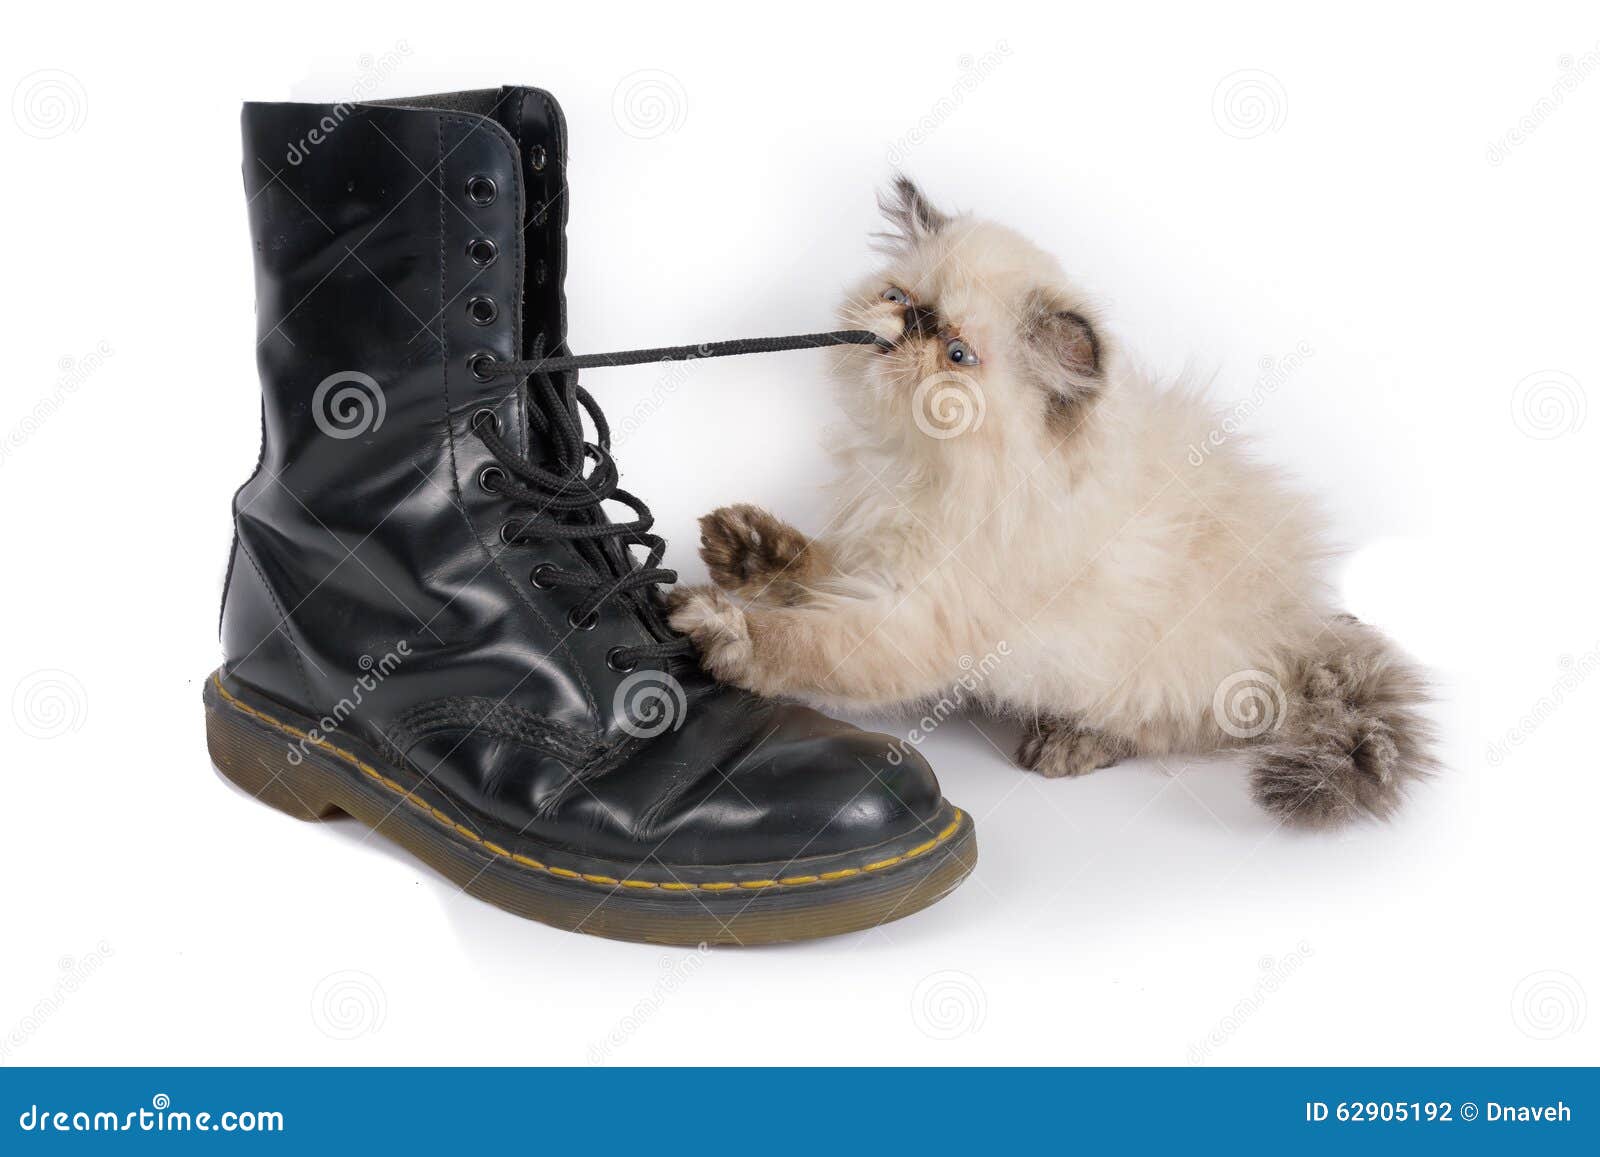 Himalauan Cat Playing with a Boot Lace Stock Photo - Image of footwear ...